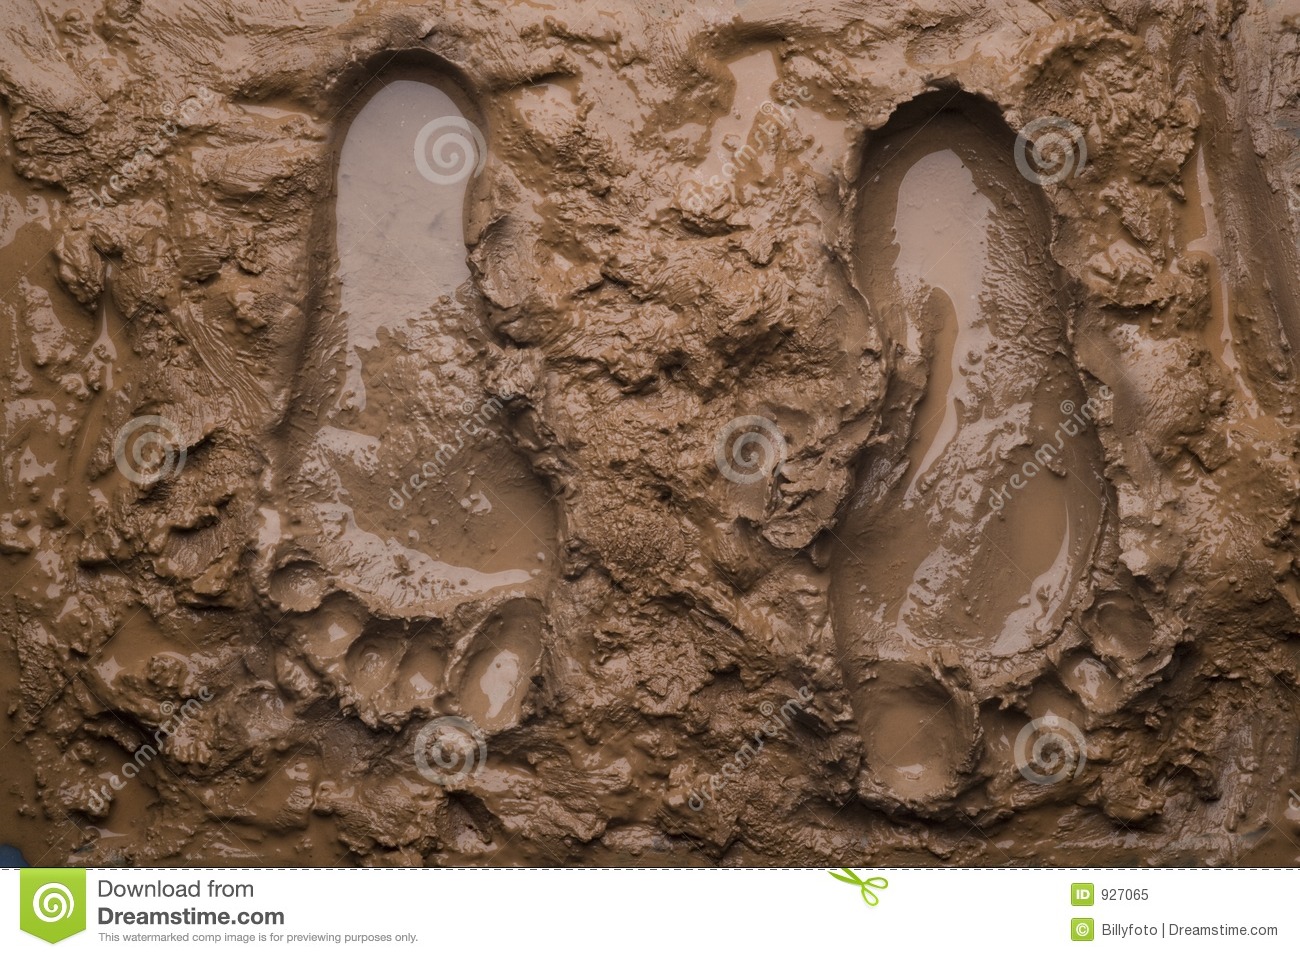 Two Footprints On Wet Mud Royalty Free Stock Photo   Image  927065